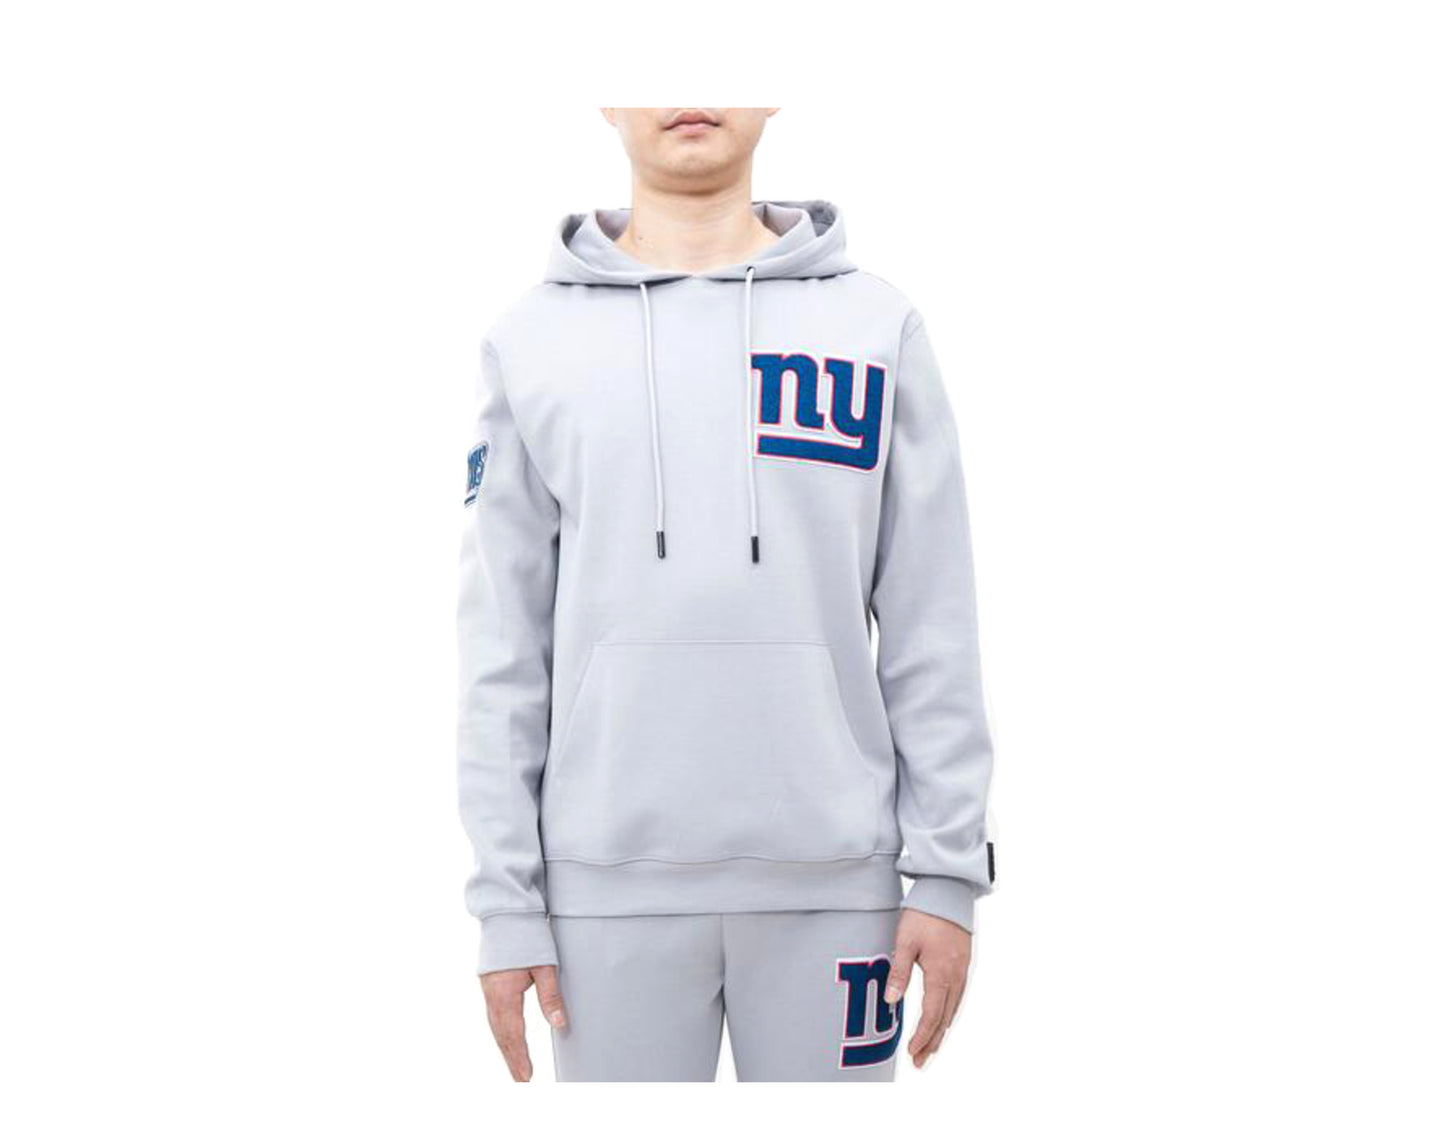 Pro Standard NFL New York Giants Logo Blended Grey/Blue Hoodie FNG540120-GRY